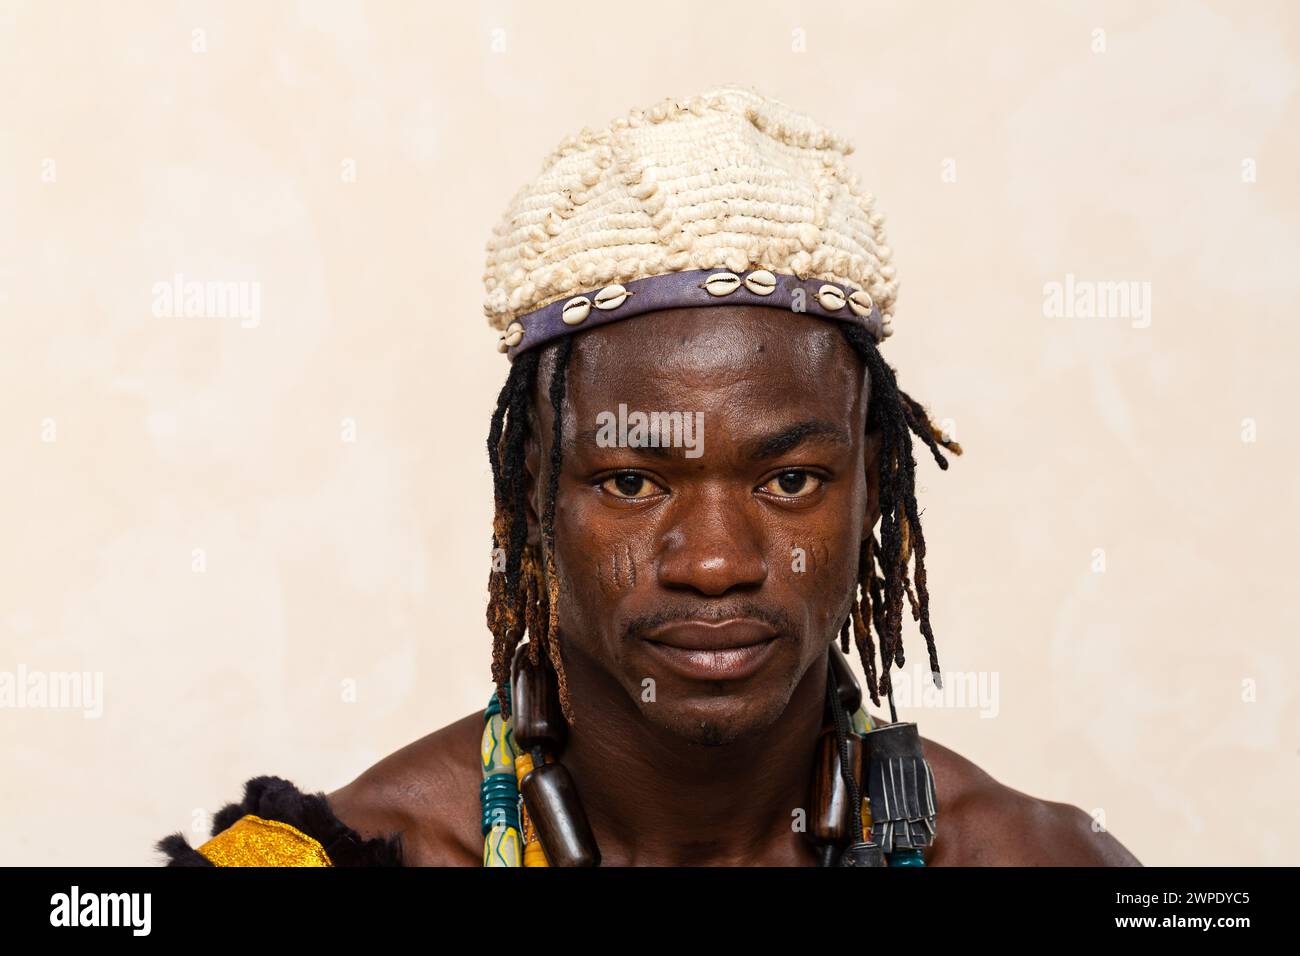 Close-up portrait of an African man showcasing traditional adornments, featuring a cowrie shell headband and a vibrant beaded necklace, reflecting his Stock Photo